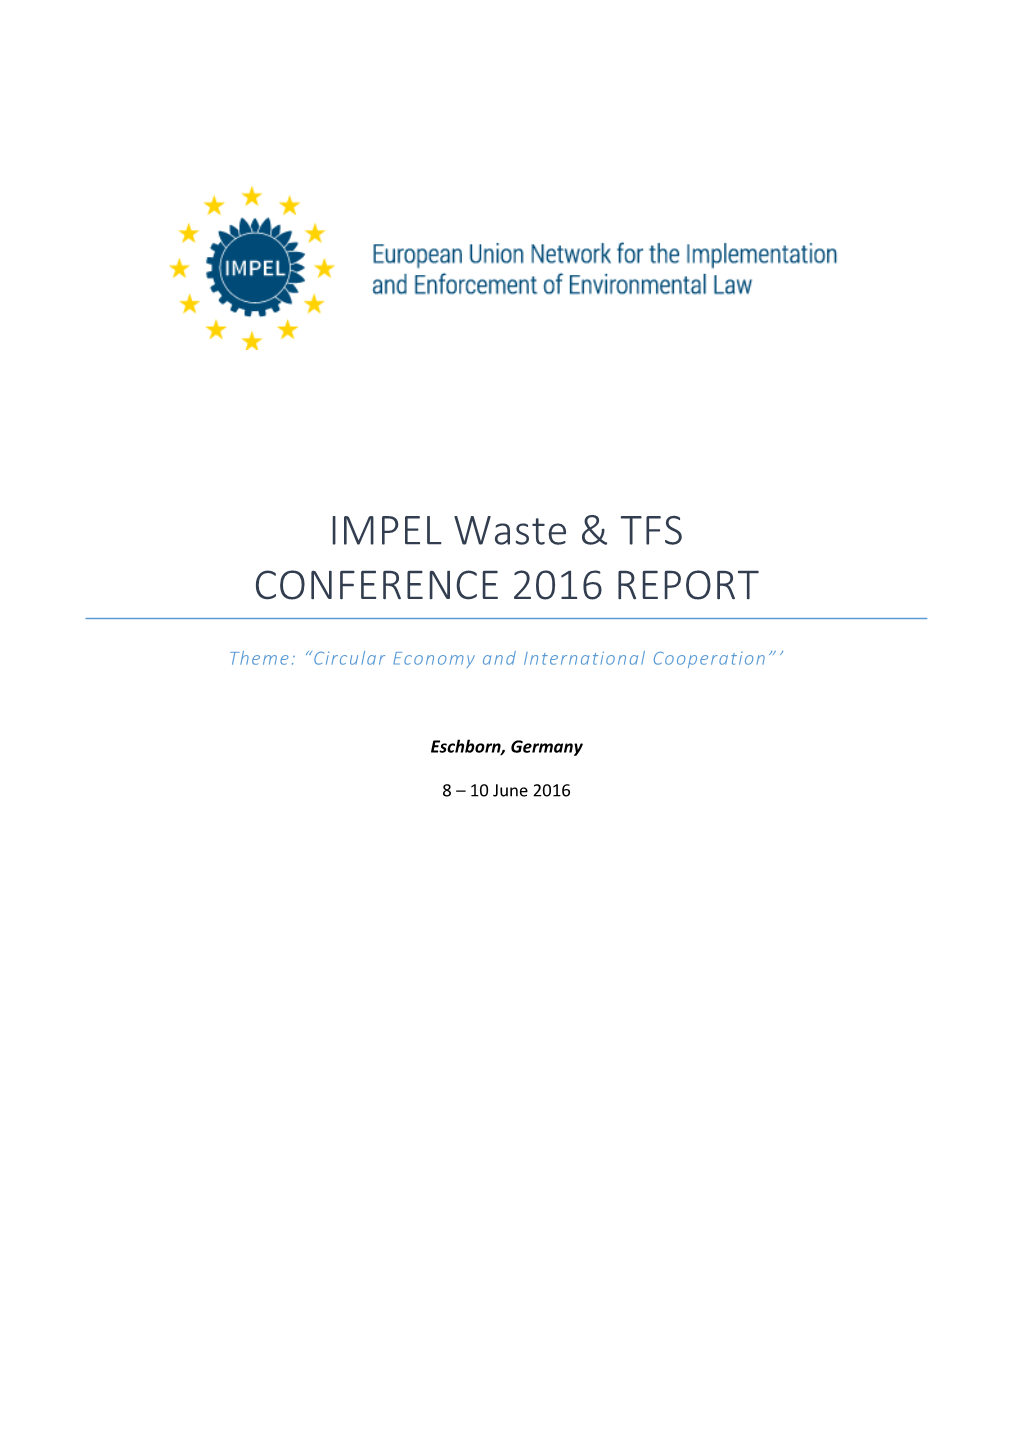 IMPEL Waste & TFS CONFERENCE 2016 REPORT